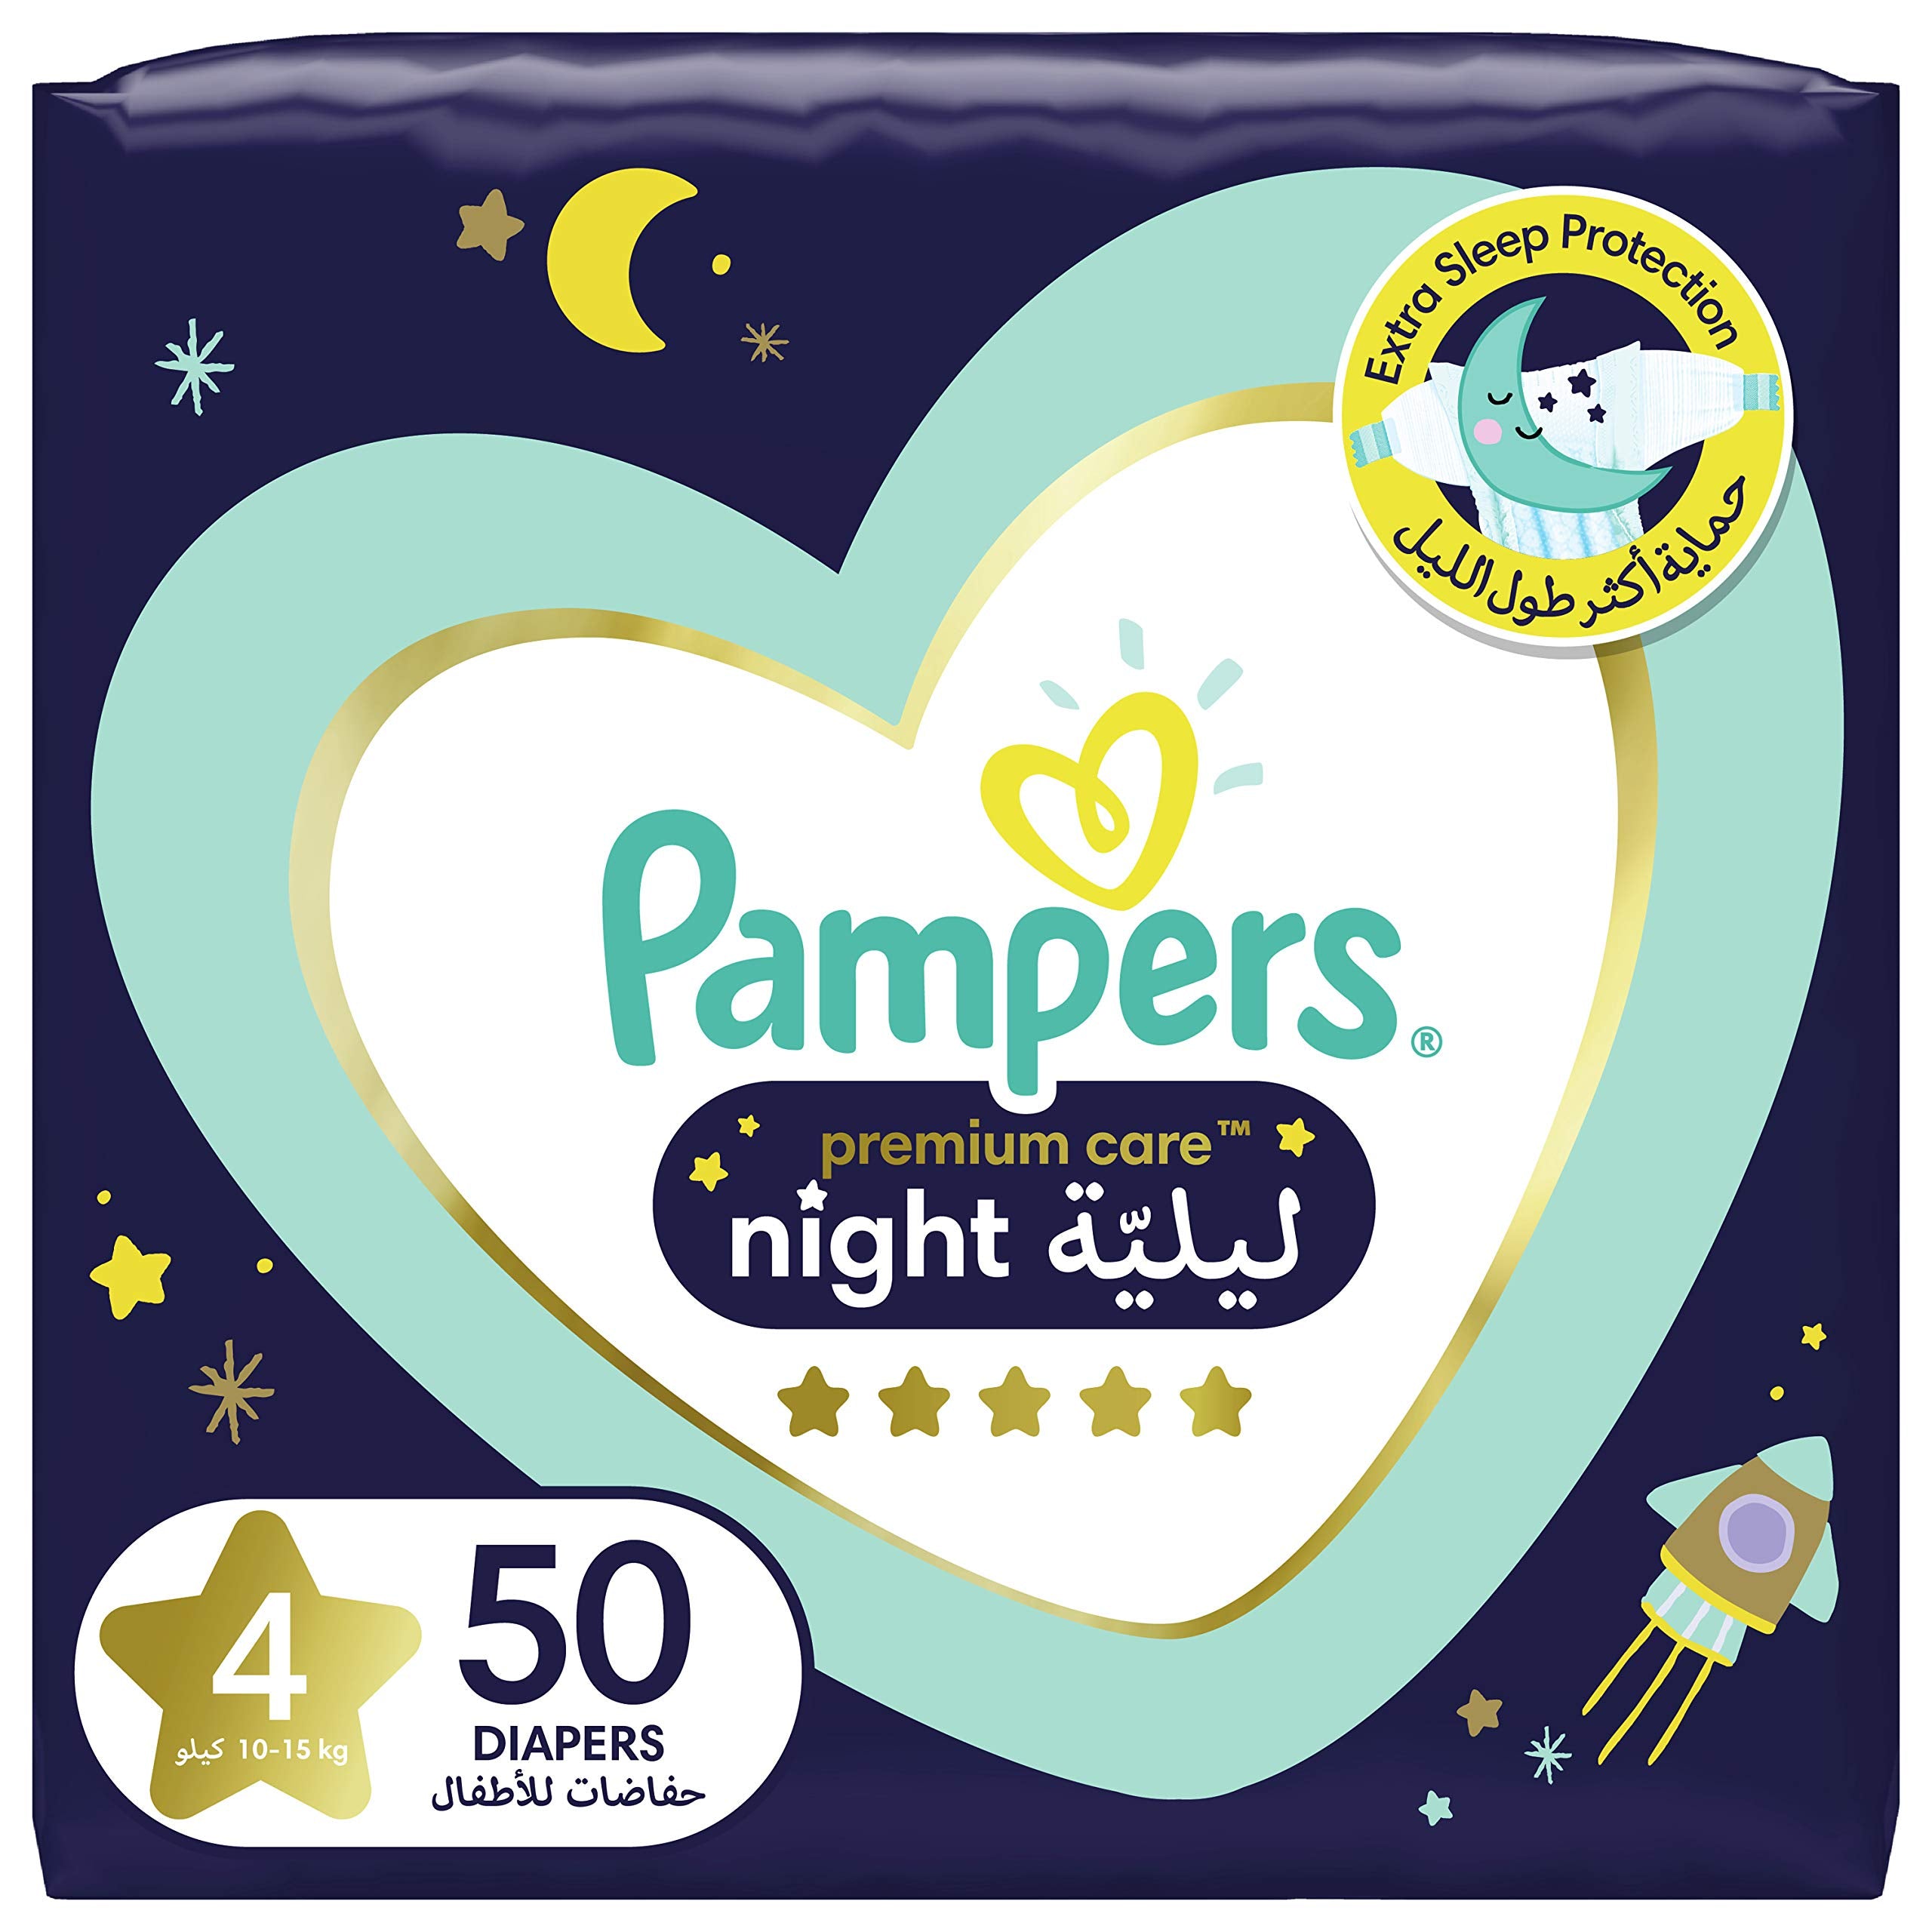 Pampers Premium Care Extra Sleep Protection Night Diapers, Size 4, 10-15Kg, 50 Diaper Count